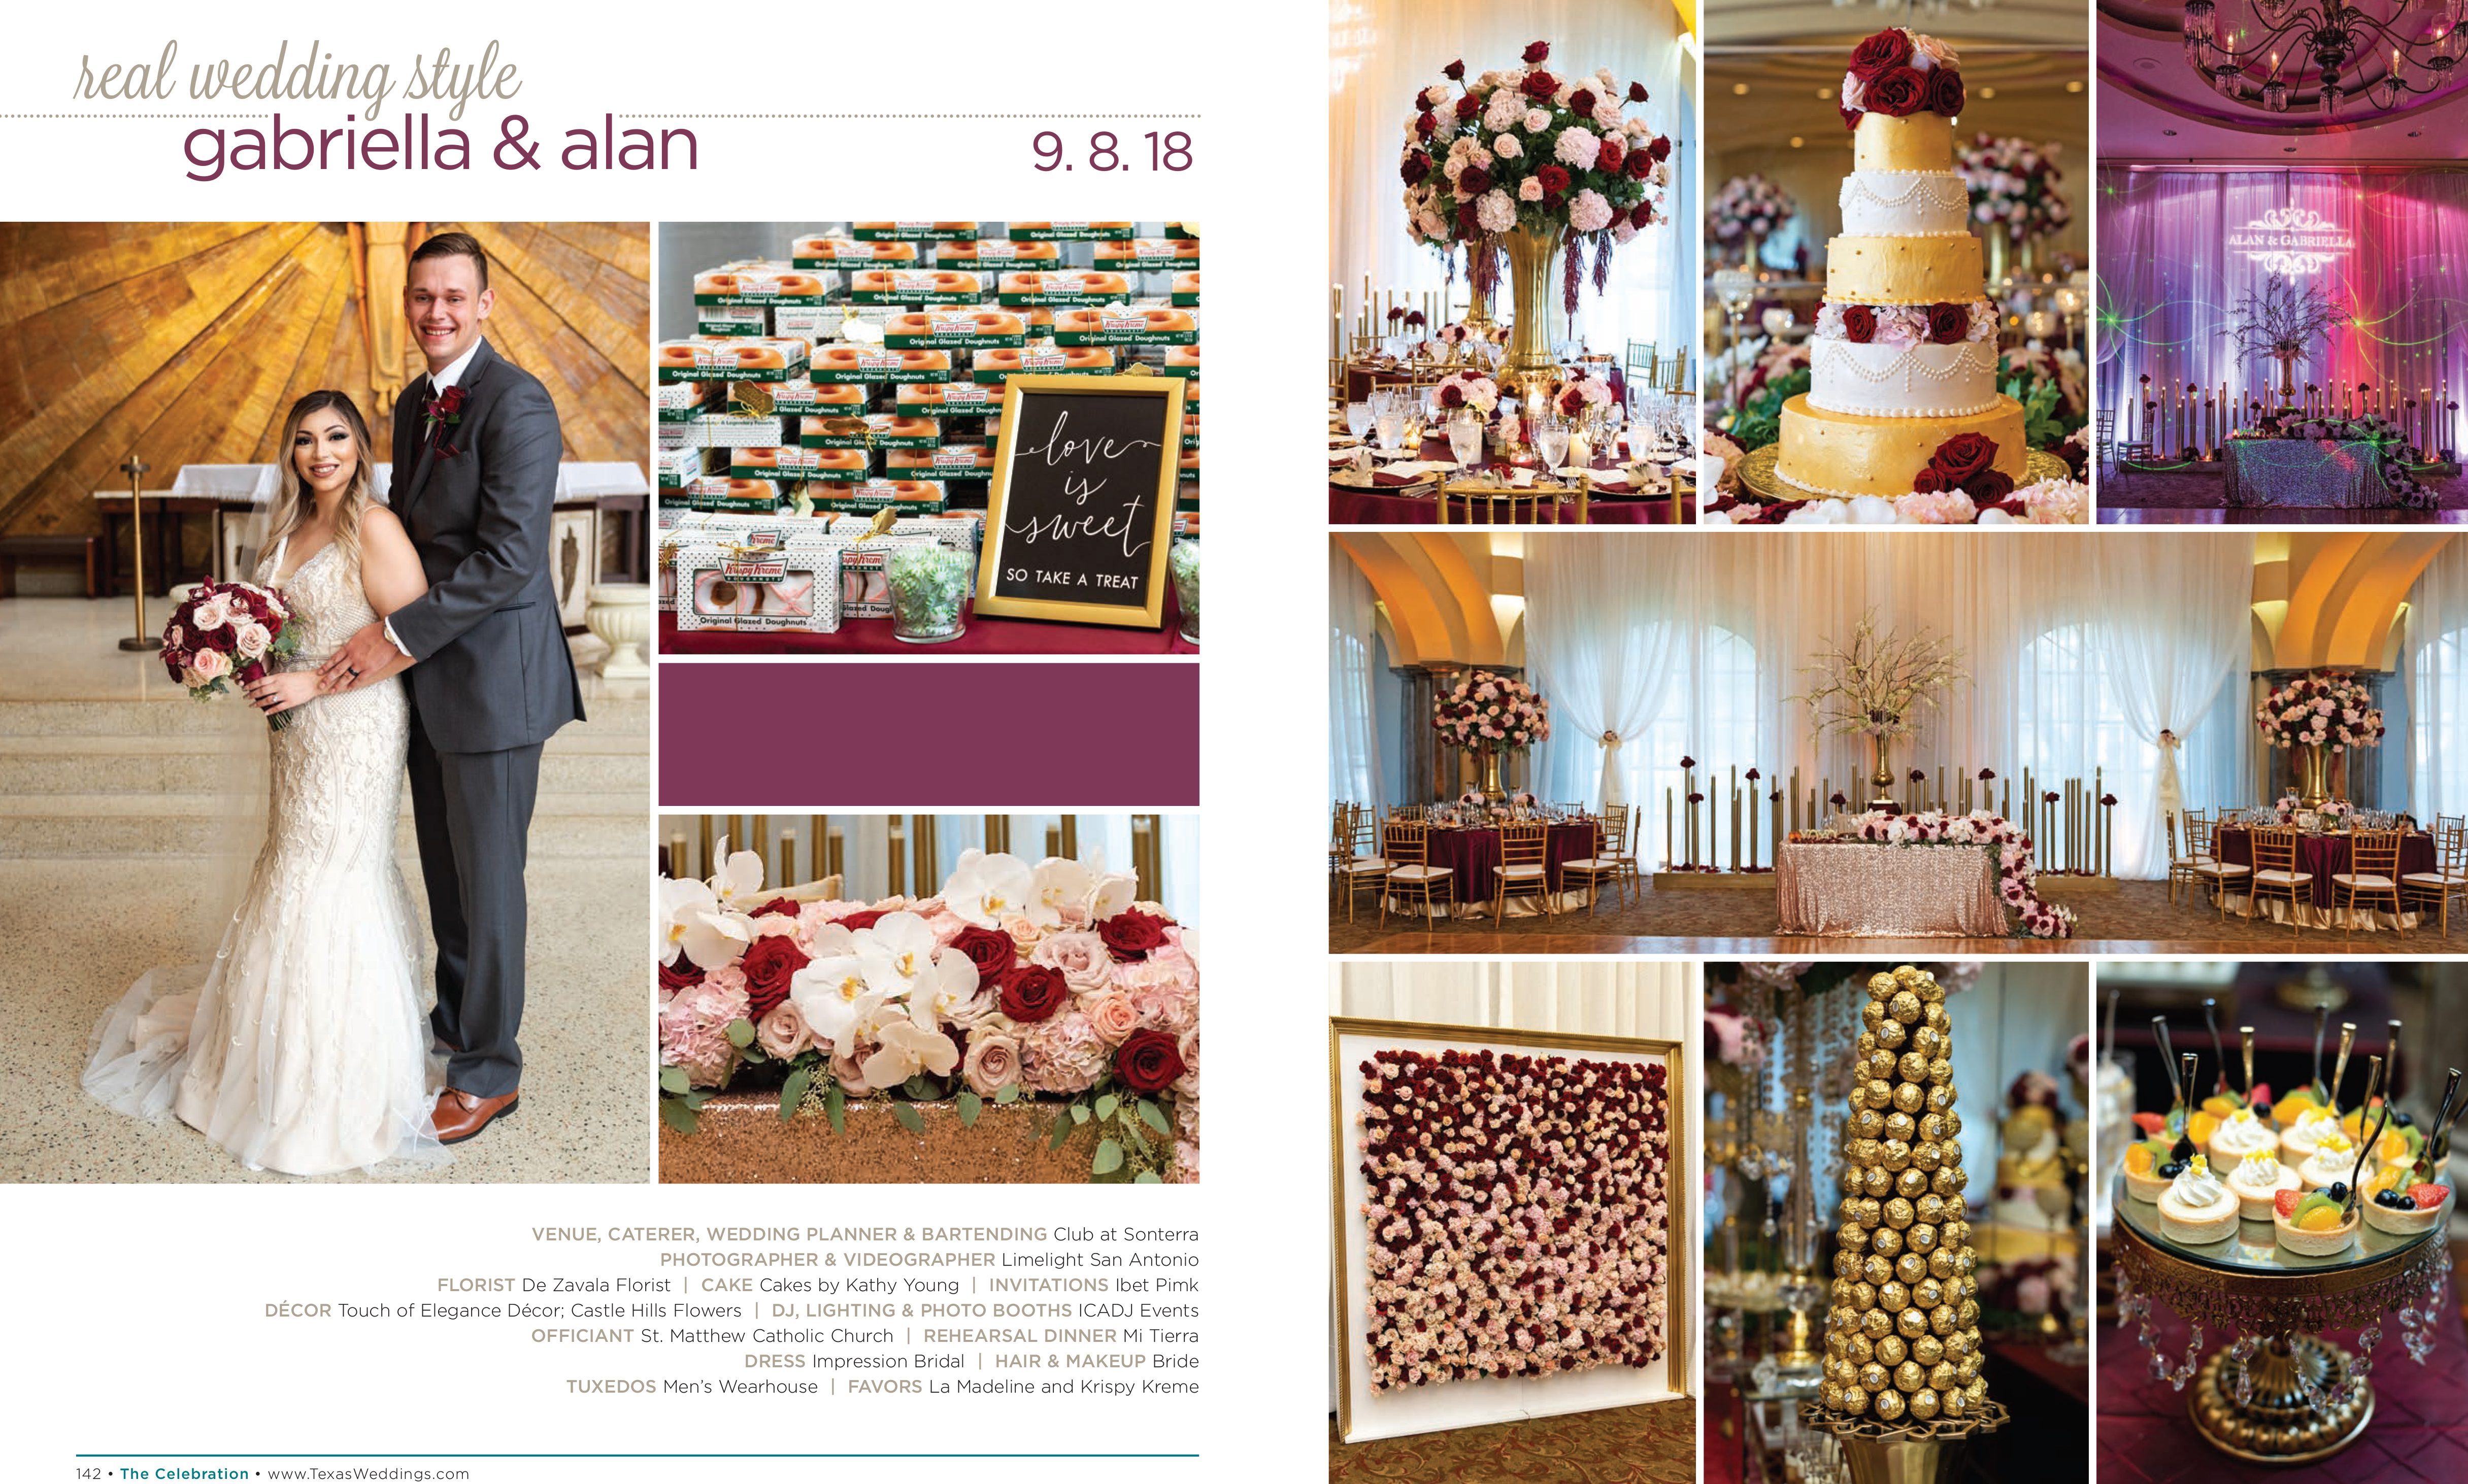 Gabriella & Alan in their Real Wedding Page in the Spring/Summer 2019 Texas Wedding Guide